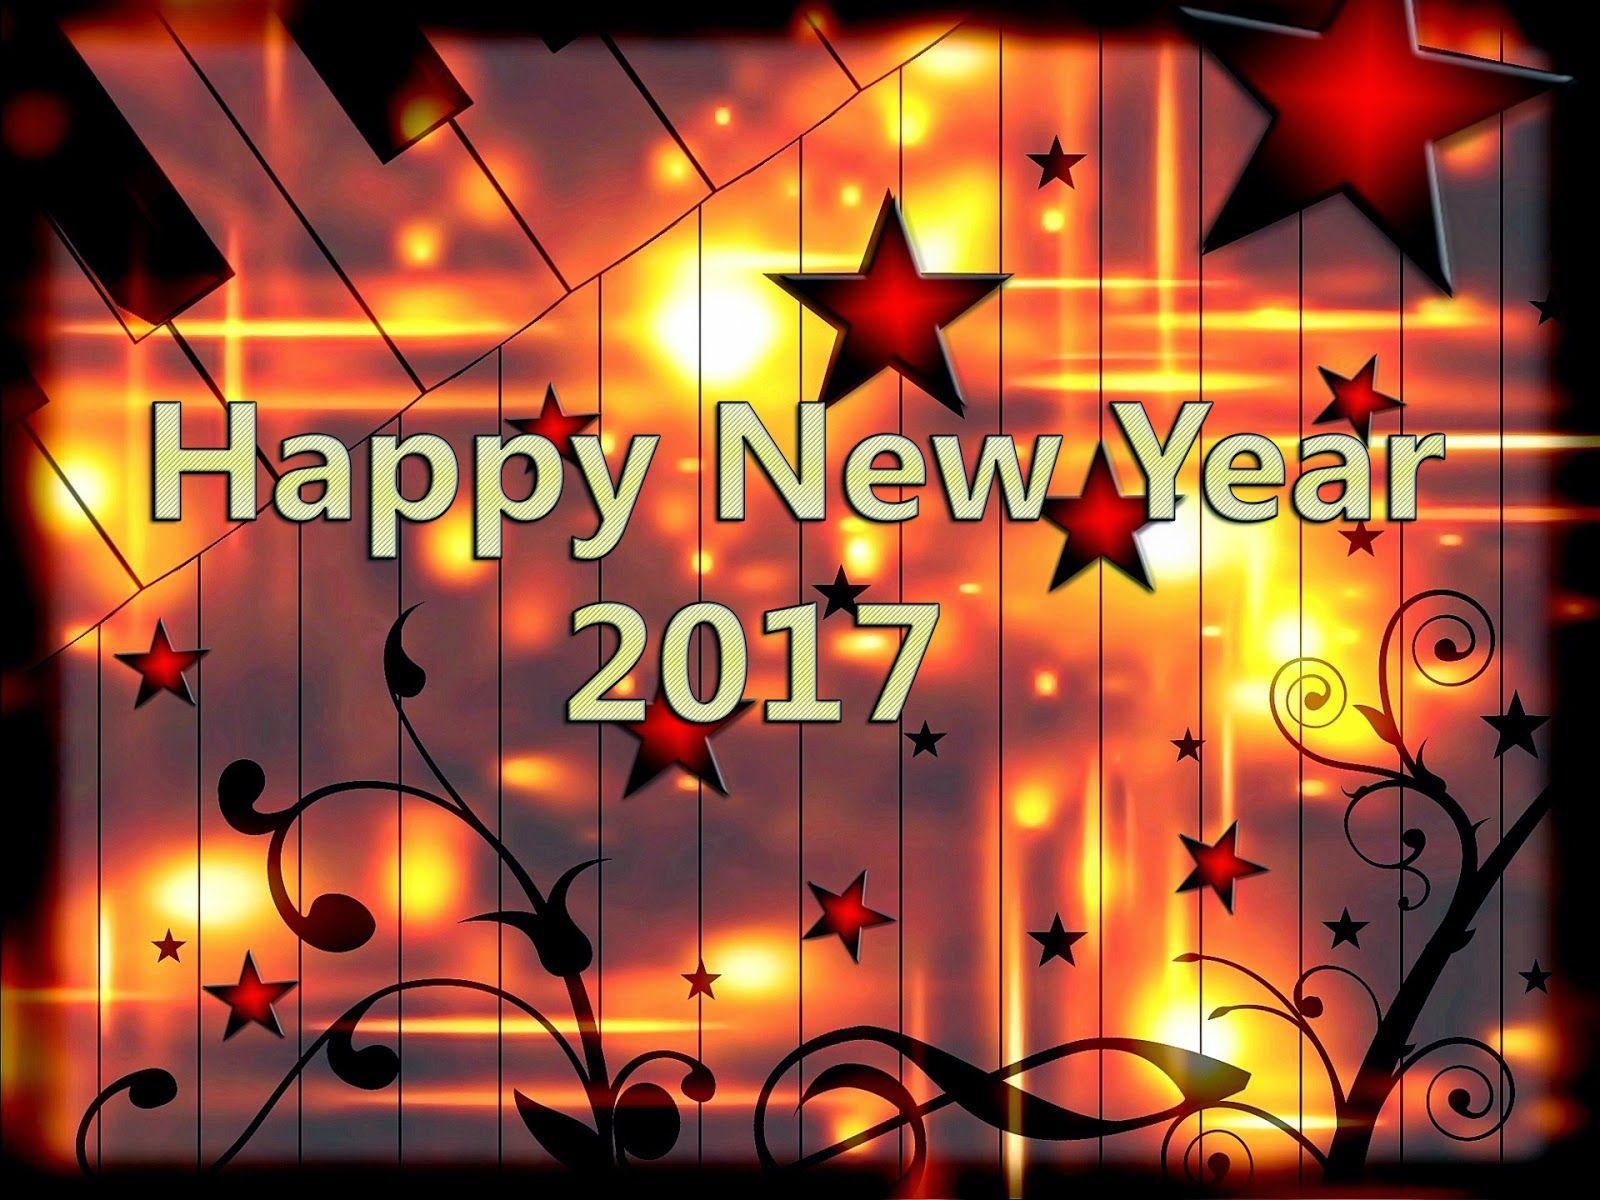 You will find here the best collection of Happy New year 2017 Image